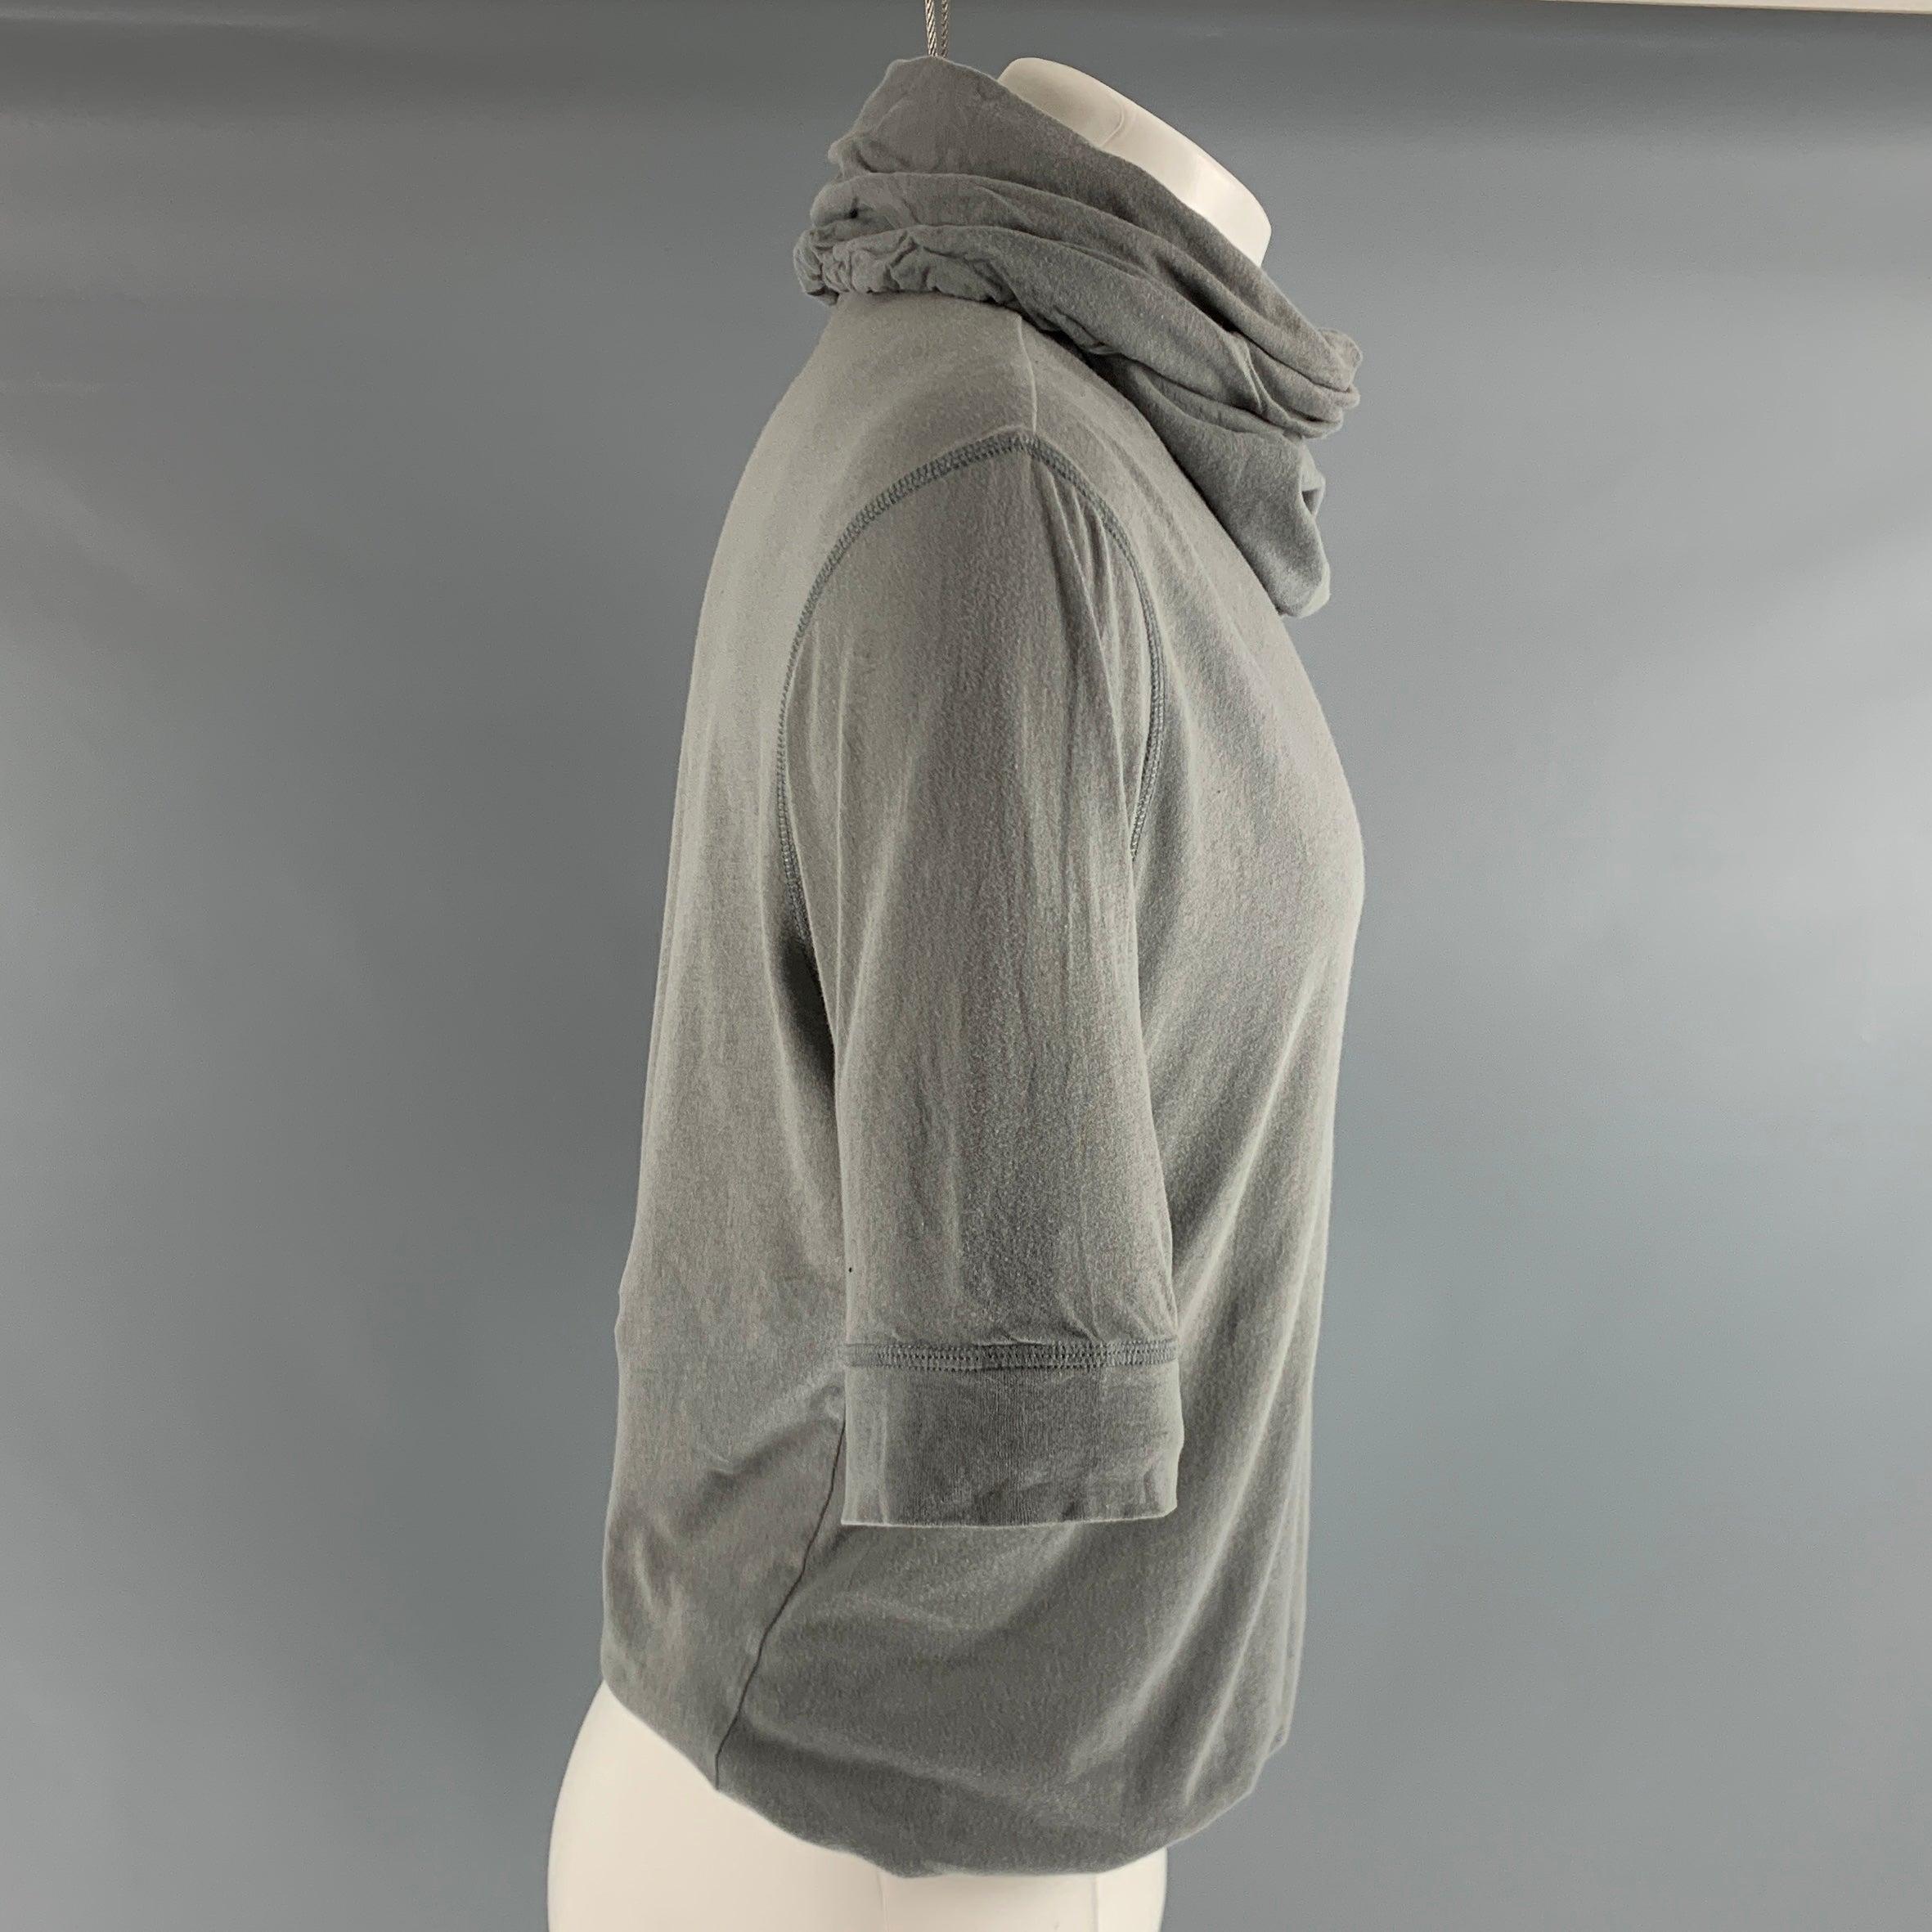 ANN DEMEULEMEESTER short sleeved pullover comes in a grey cotton jersey knit material and features a hooded style, and a 3/4 sleeves. Very Good Pre-Owned Condition. Minor signs of wear. 
  

Marked:   S 

Measurements: 
 
Shoulder: 19.5 inches